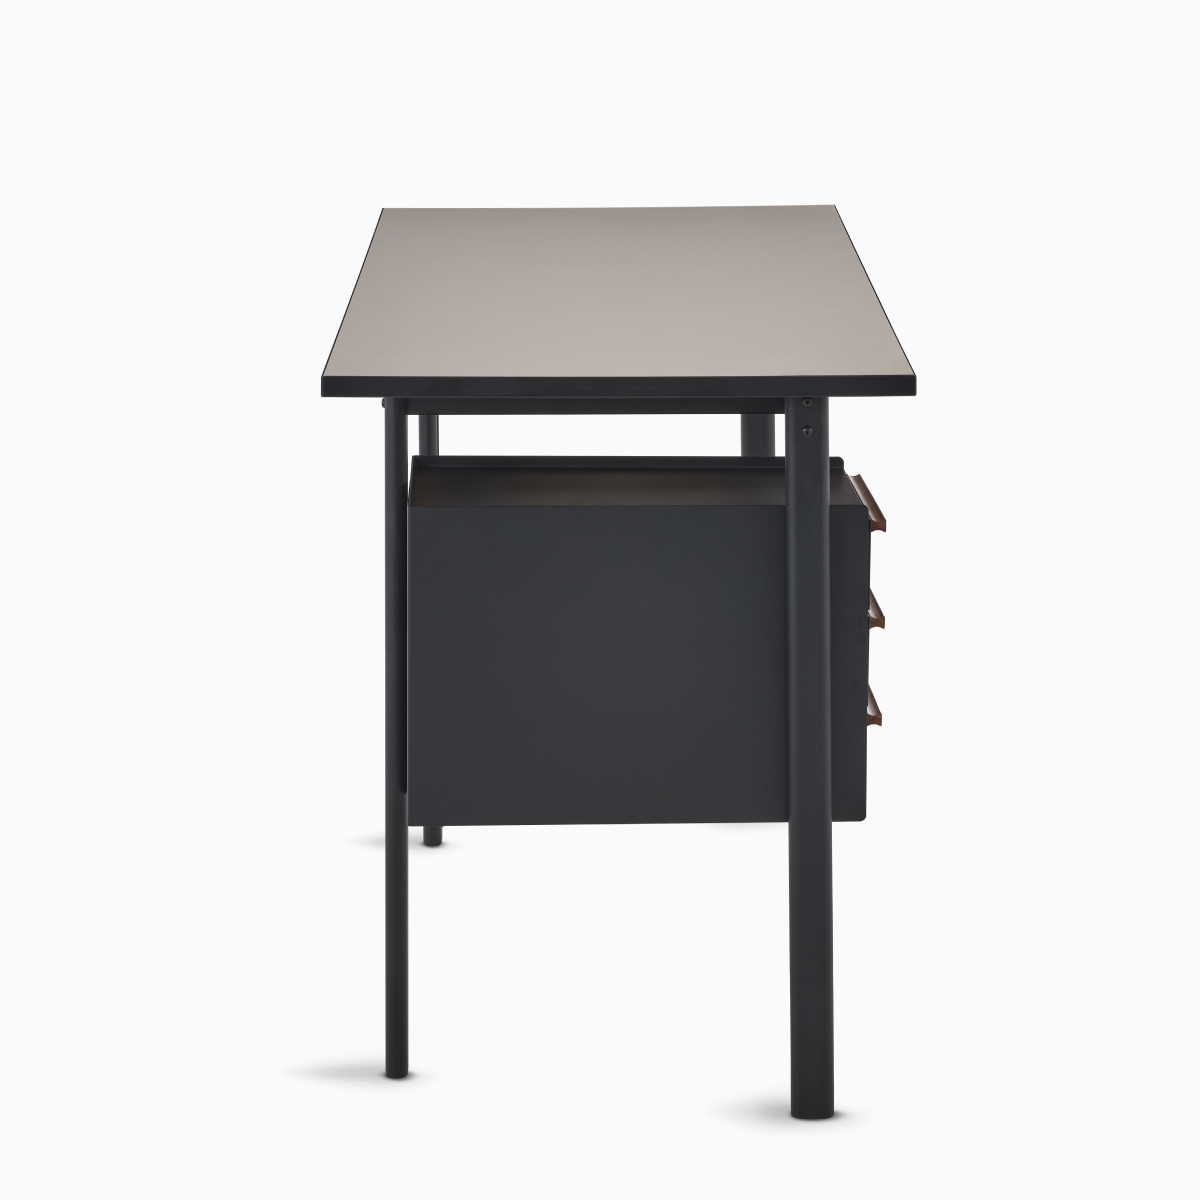 Side view of a Mode desk in black with sandstone top.